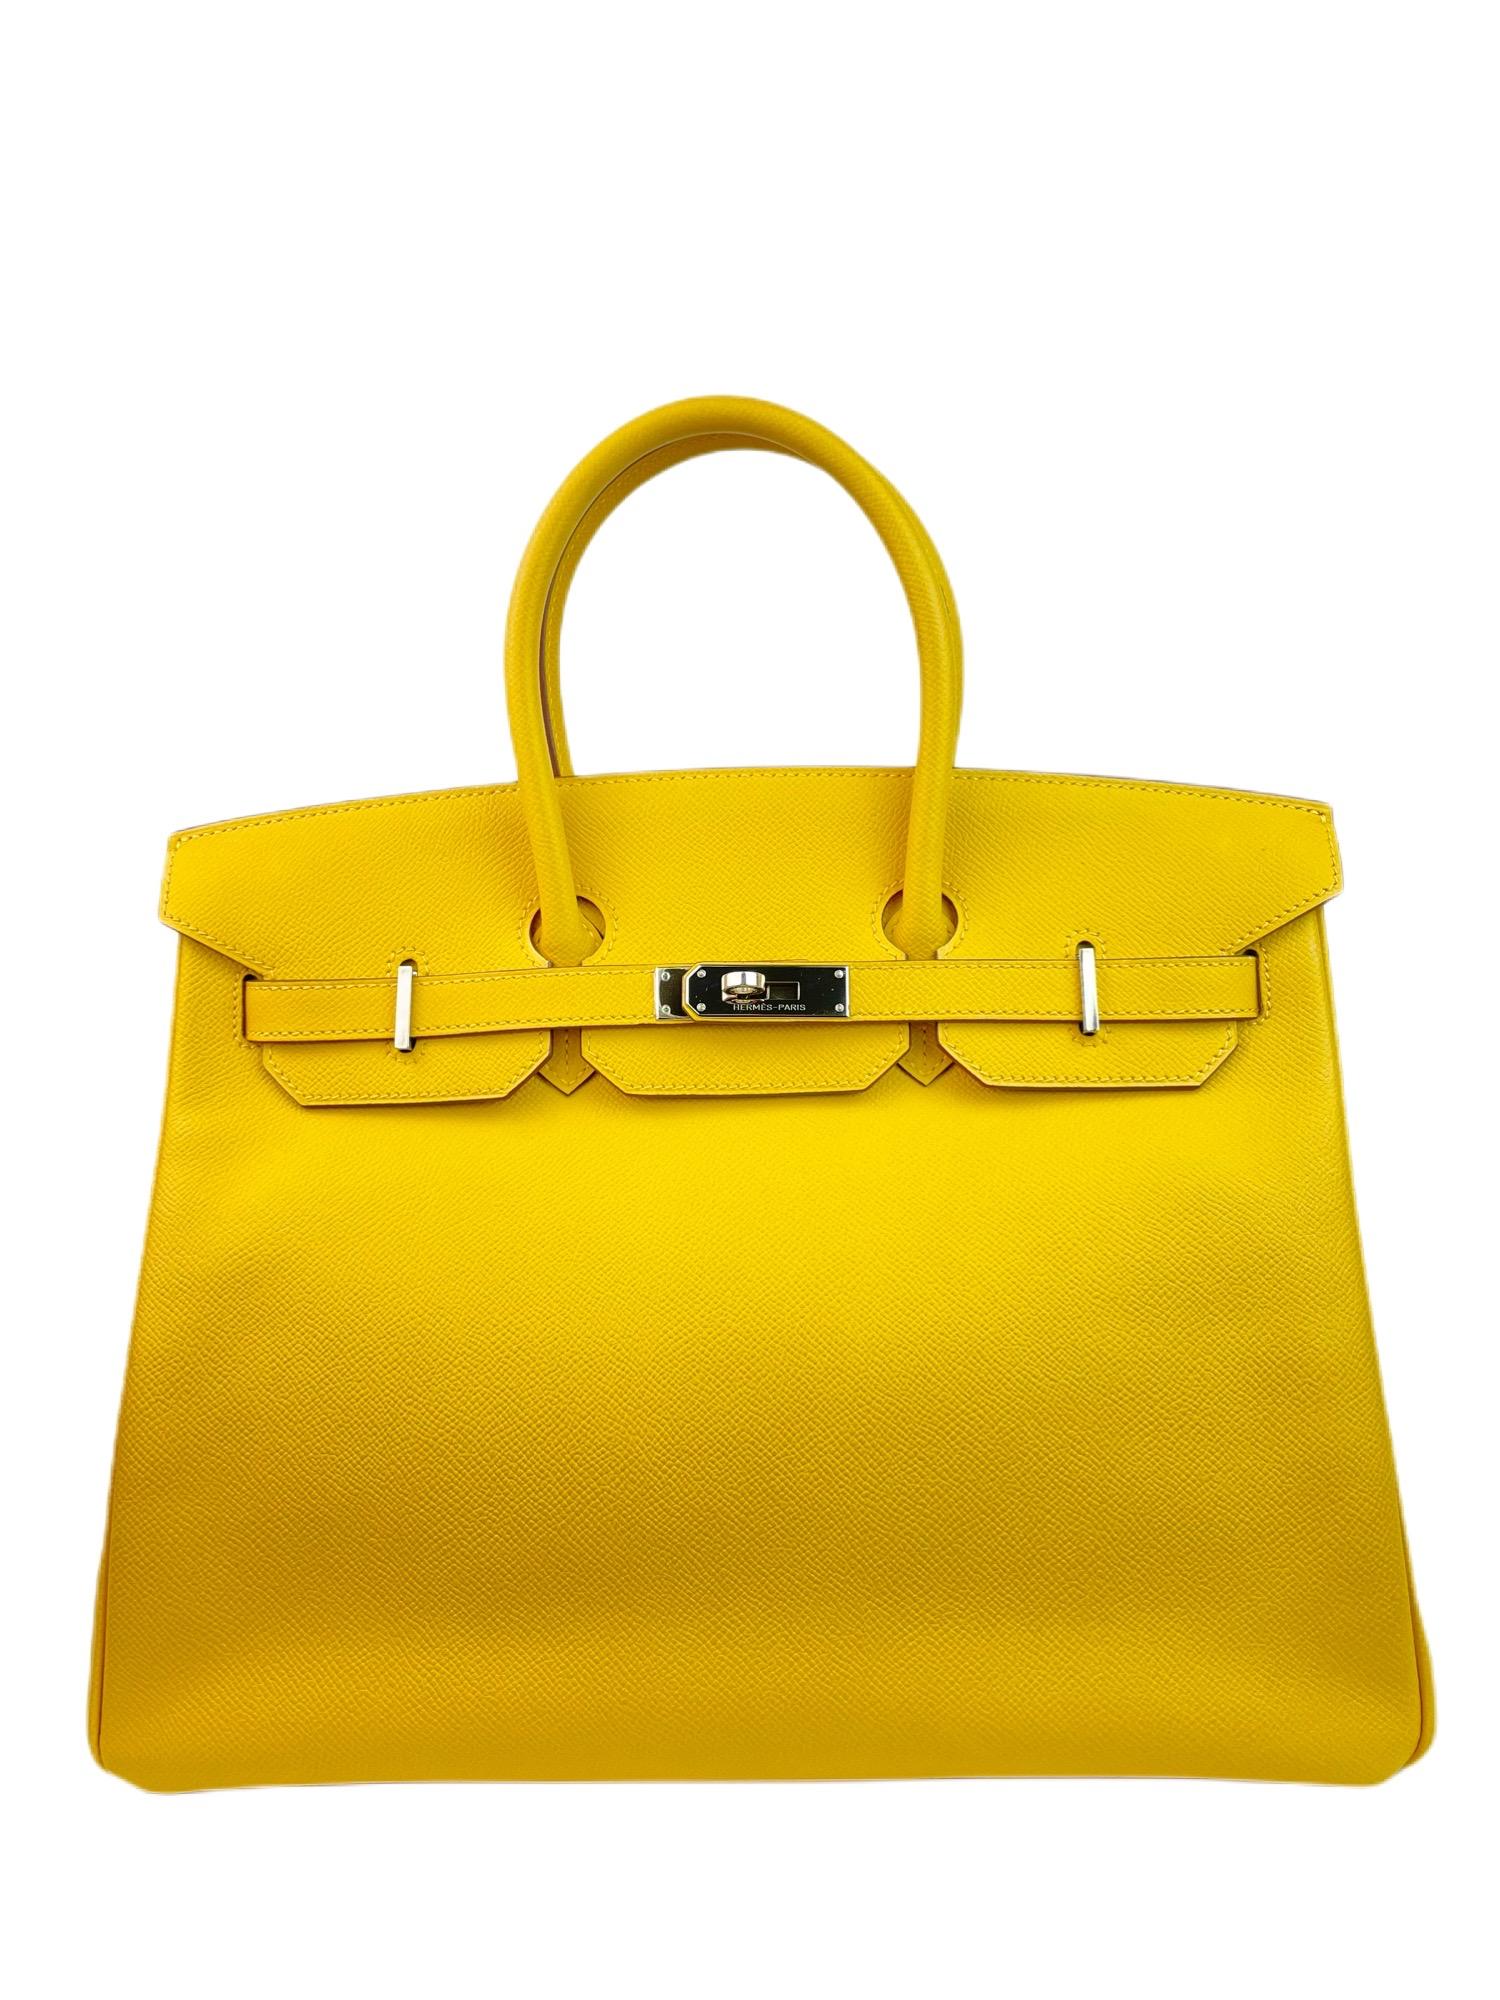 HERMES BIRKIN 35 SOLEIL YELLOW EPSOM PALLADIUM HARDWARE. Excellent condition with Plastic on Hardware of 1 Strap and back plate. Perfect corners and Pristine structure. 

Shop with Confidence from Lux Addicts. Authenticity Guaranteed! 